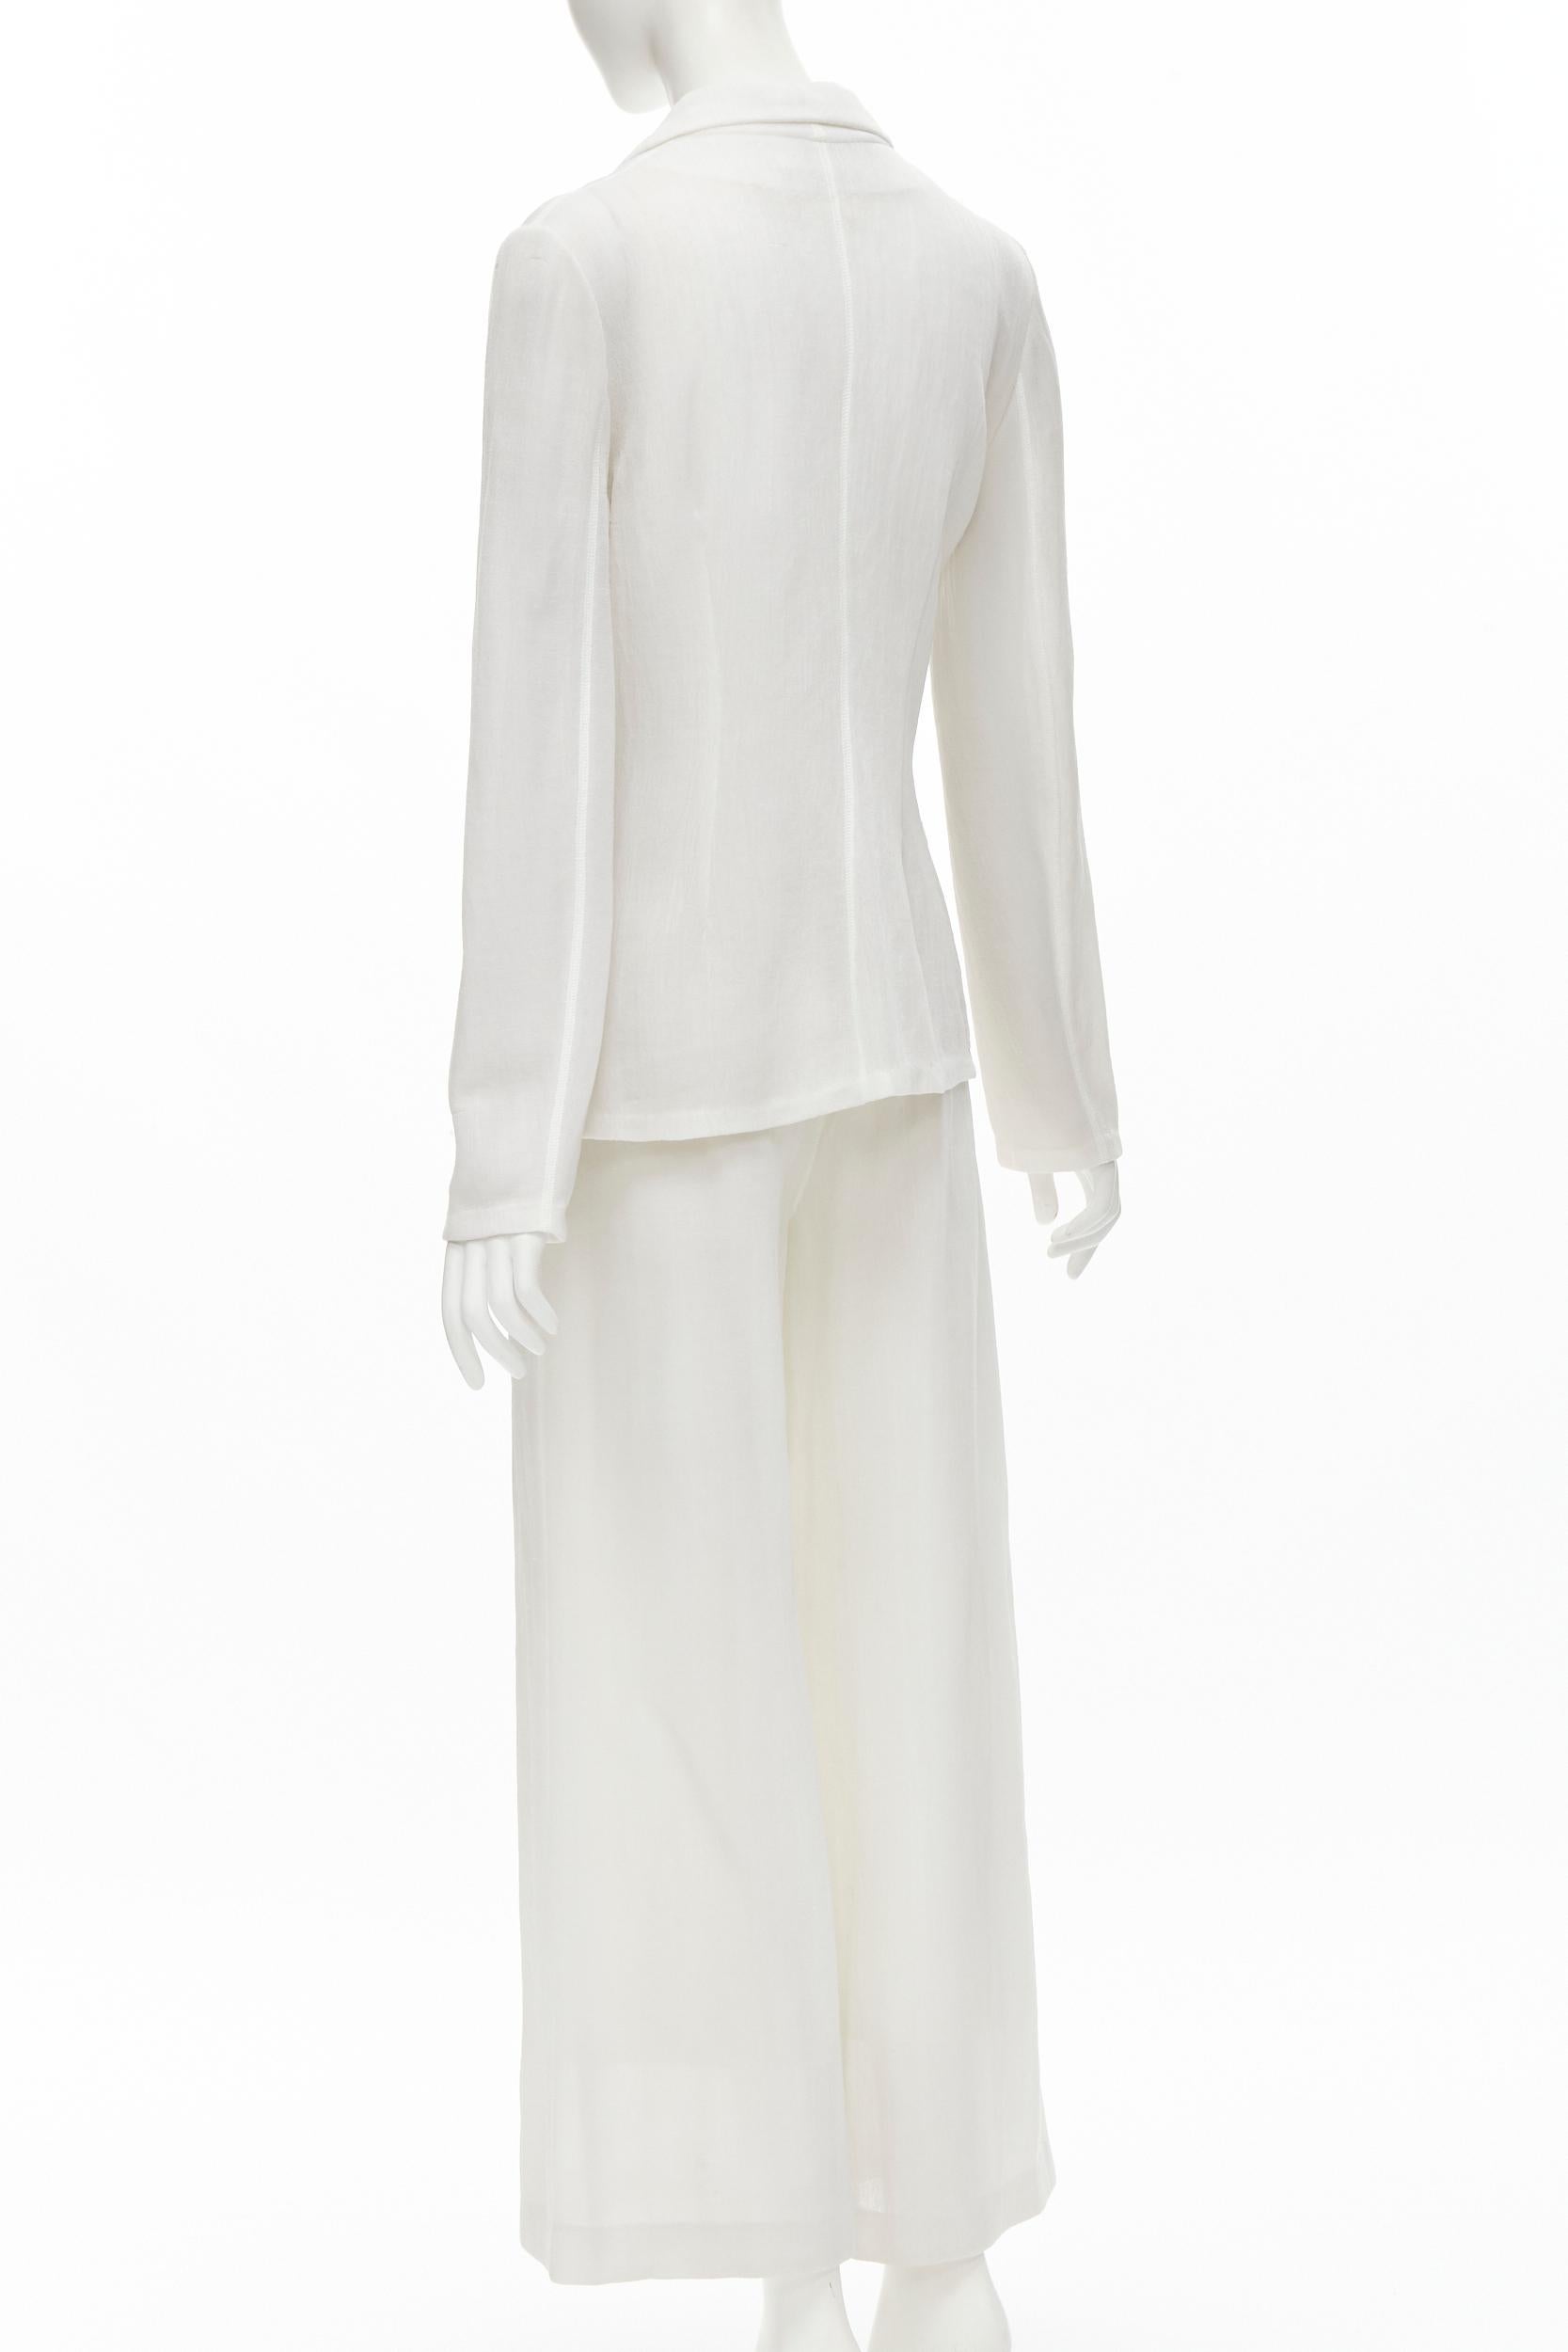 MARIOT CHANET white textured logo button fitted blazer wide leg pants IT42 M For Sale 1